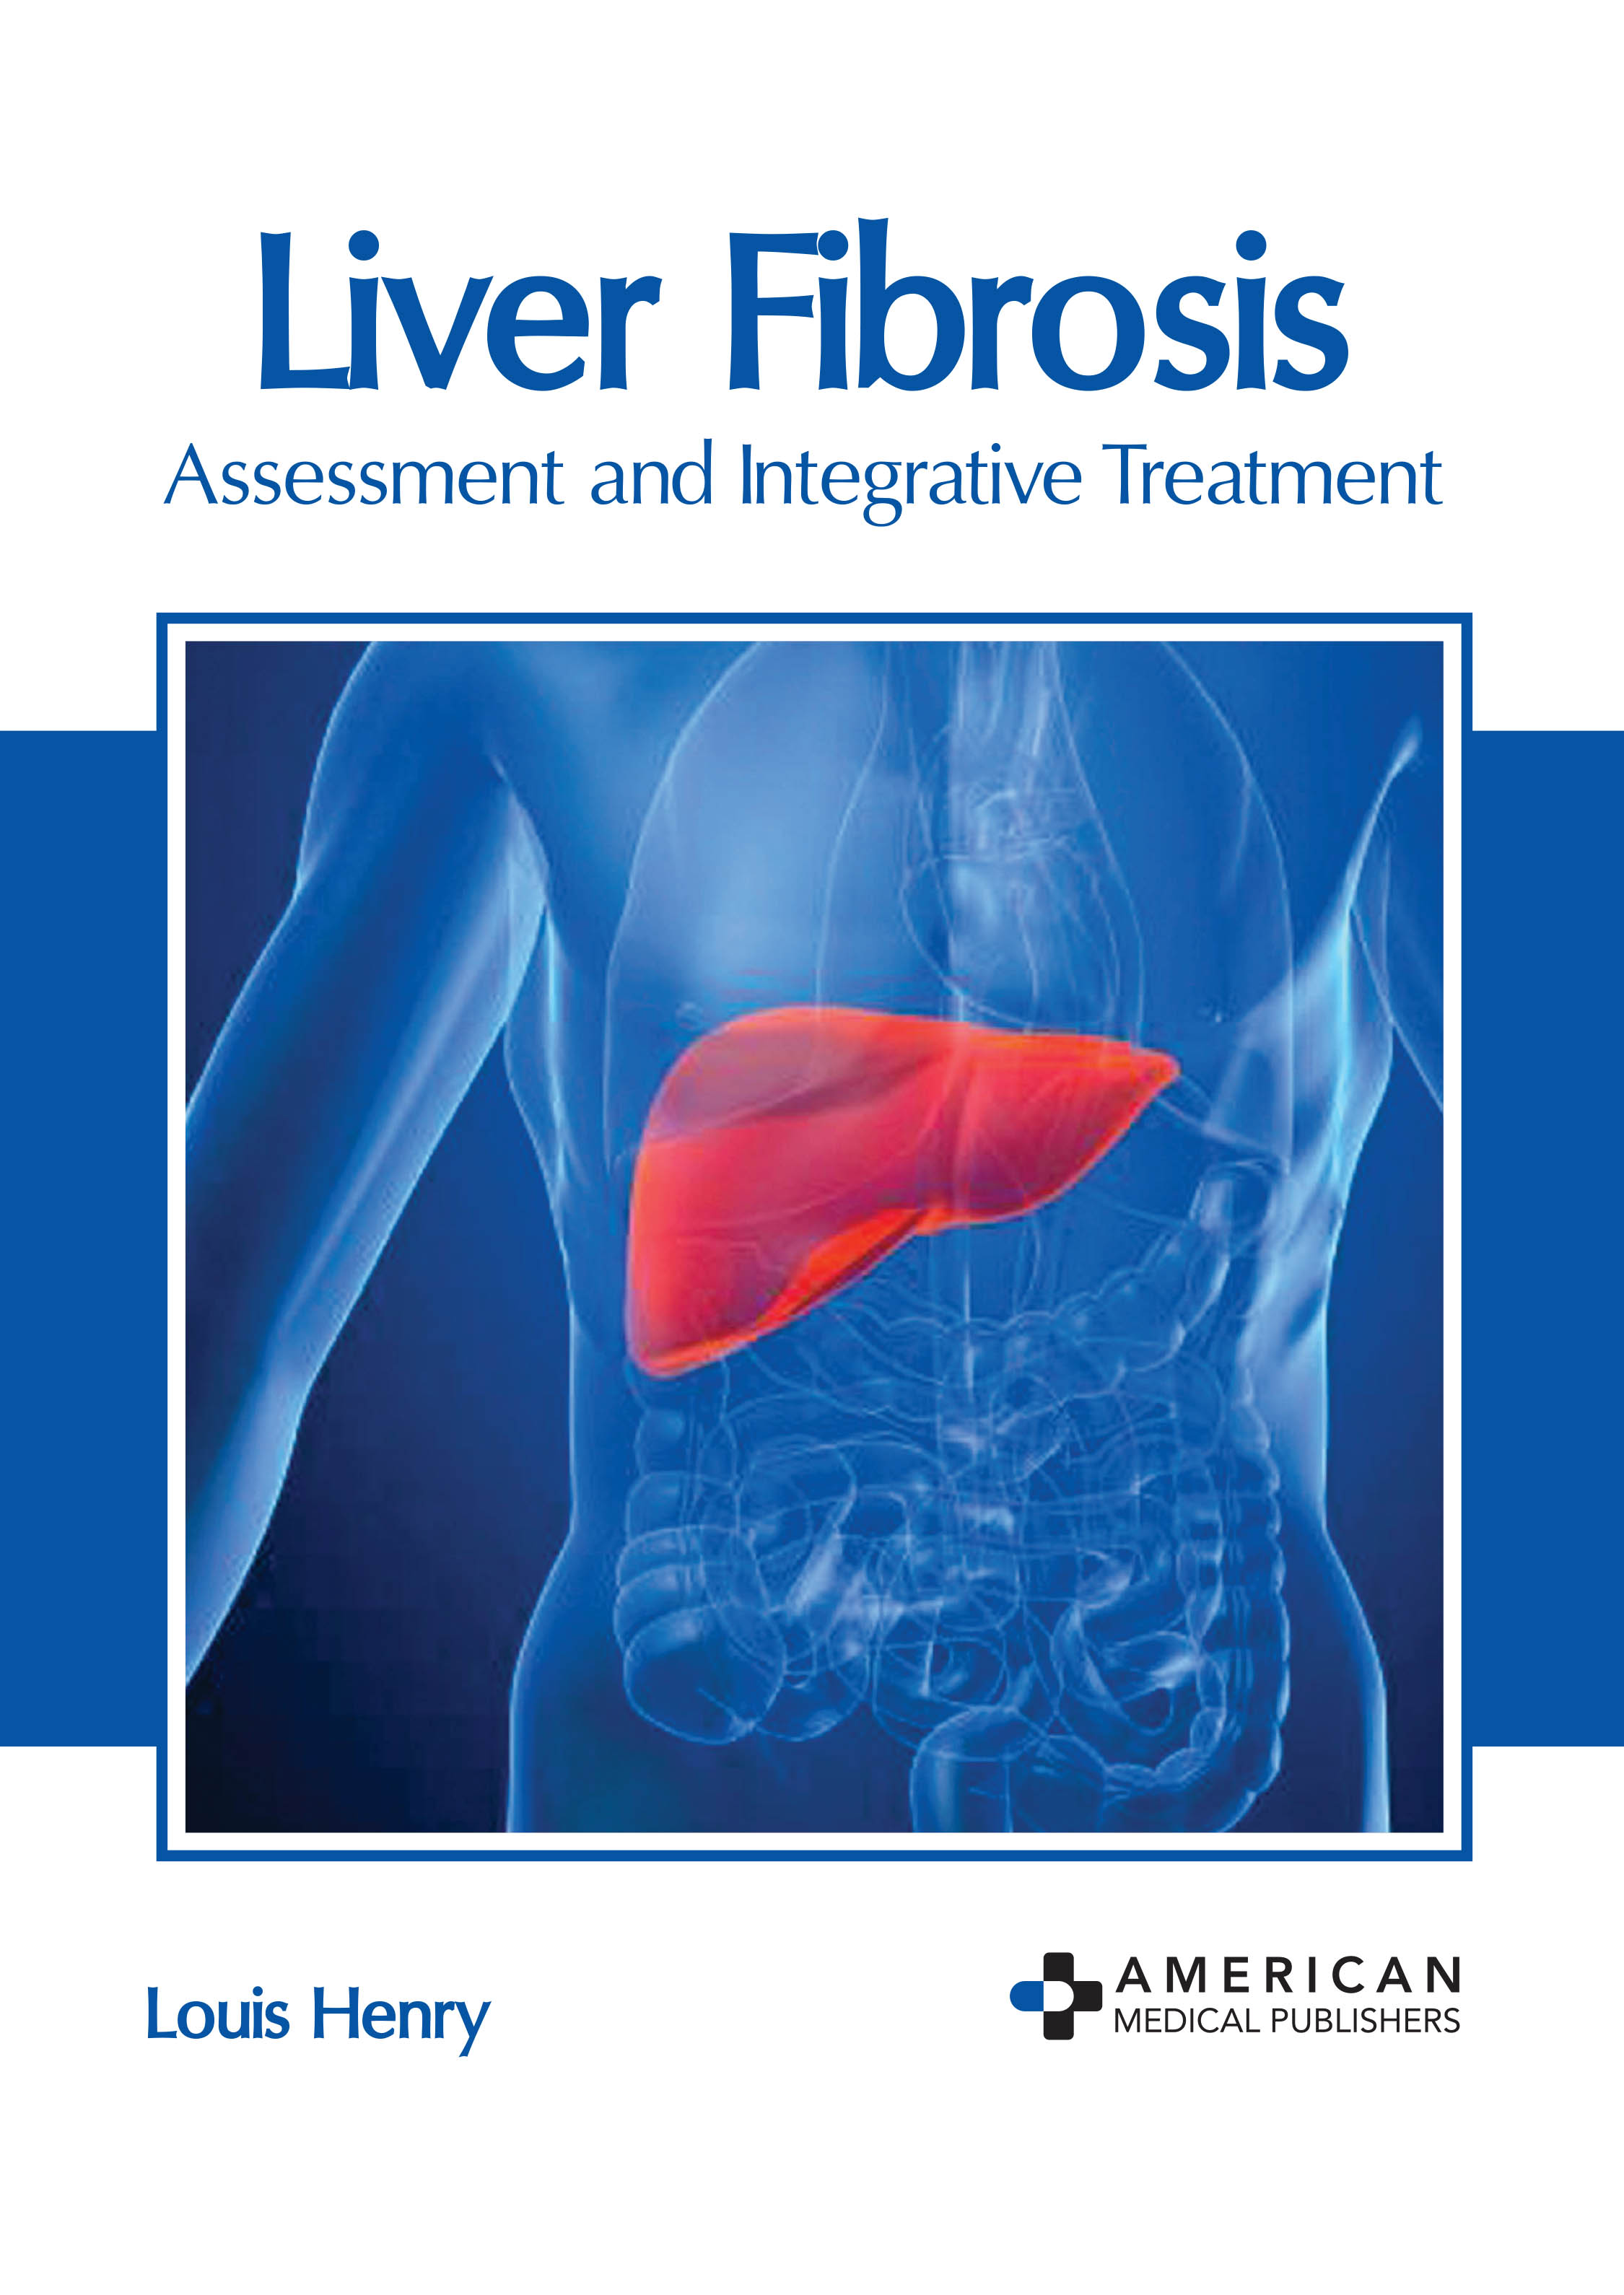 

exclusive-publishers/american-medical-publishers/liver-fibrosis-assessment-and-integrative-treatment-9781639271955